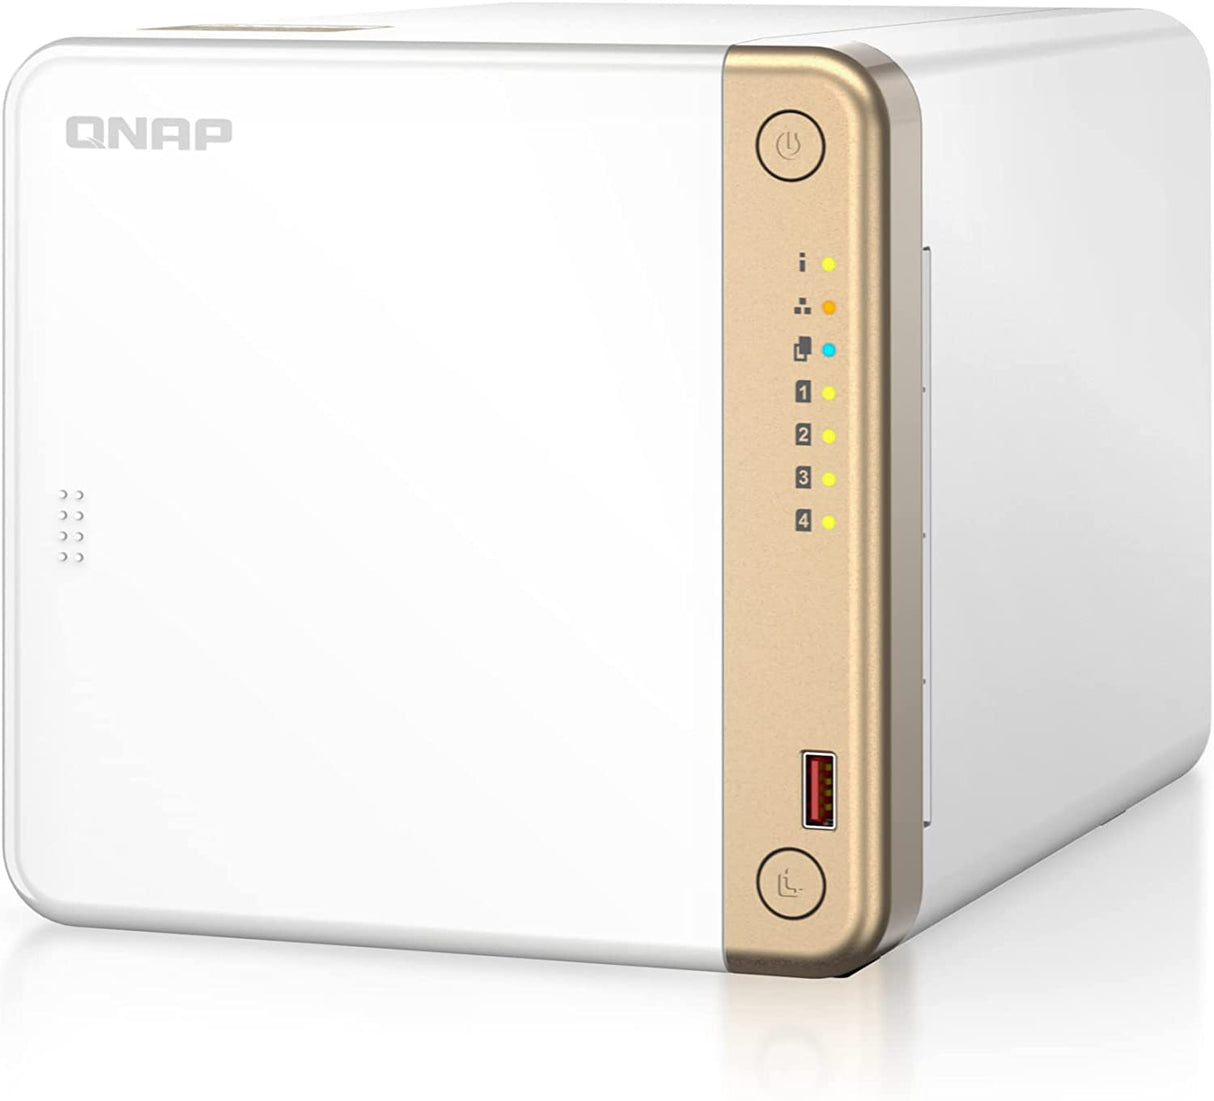 QNAP TS-462-2G-US 4 Bay Multimedia Desktop NAS with Intel Celeron Dual-core Processor with M.2 PCIe Slots and PCIe expandability and 2.5GbE (2.5G/1G/100M) Network Connectivity (Diskless)